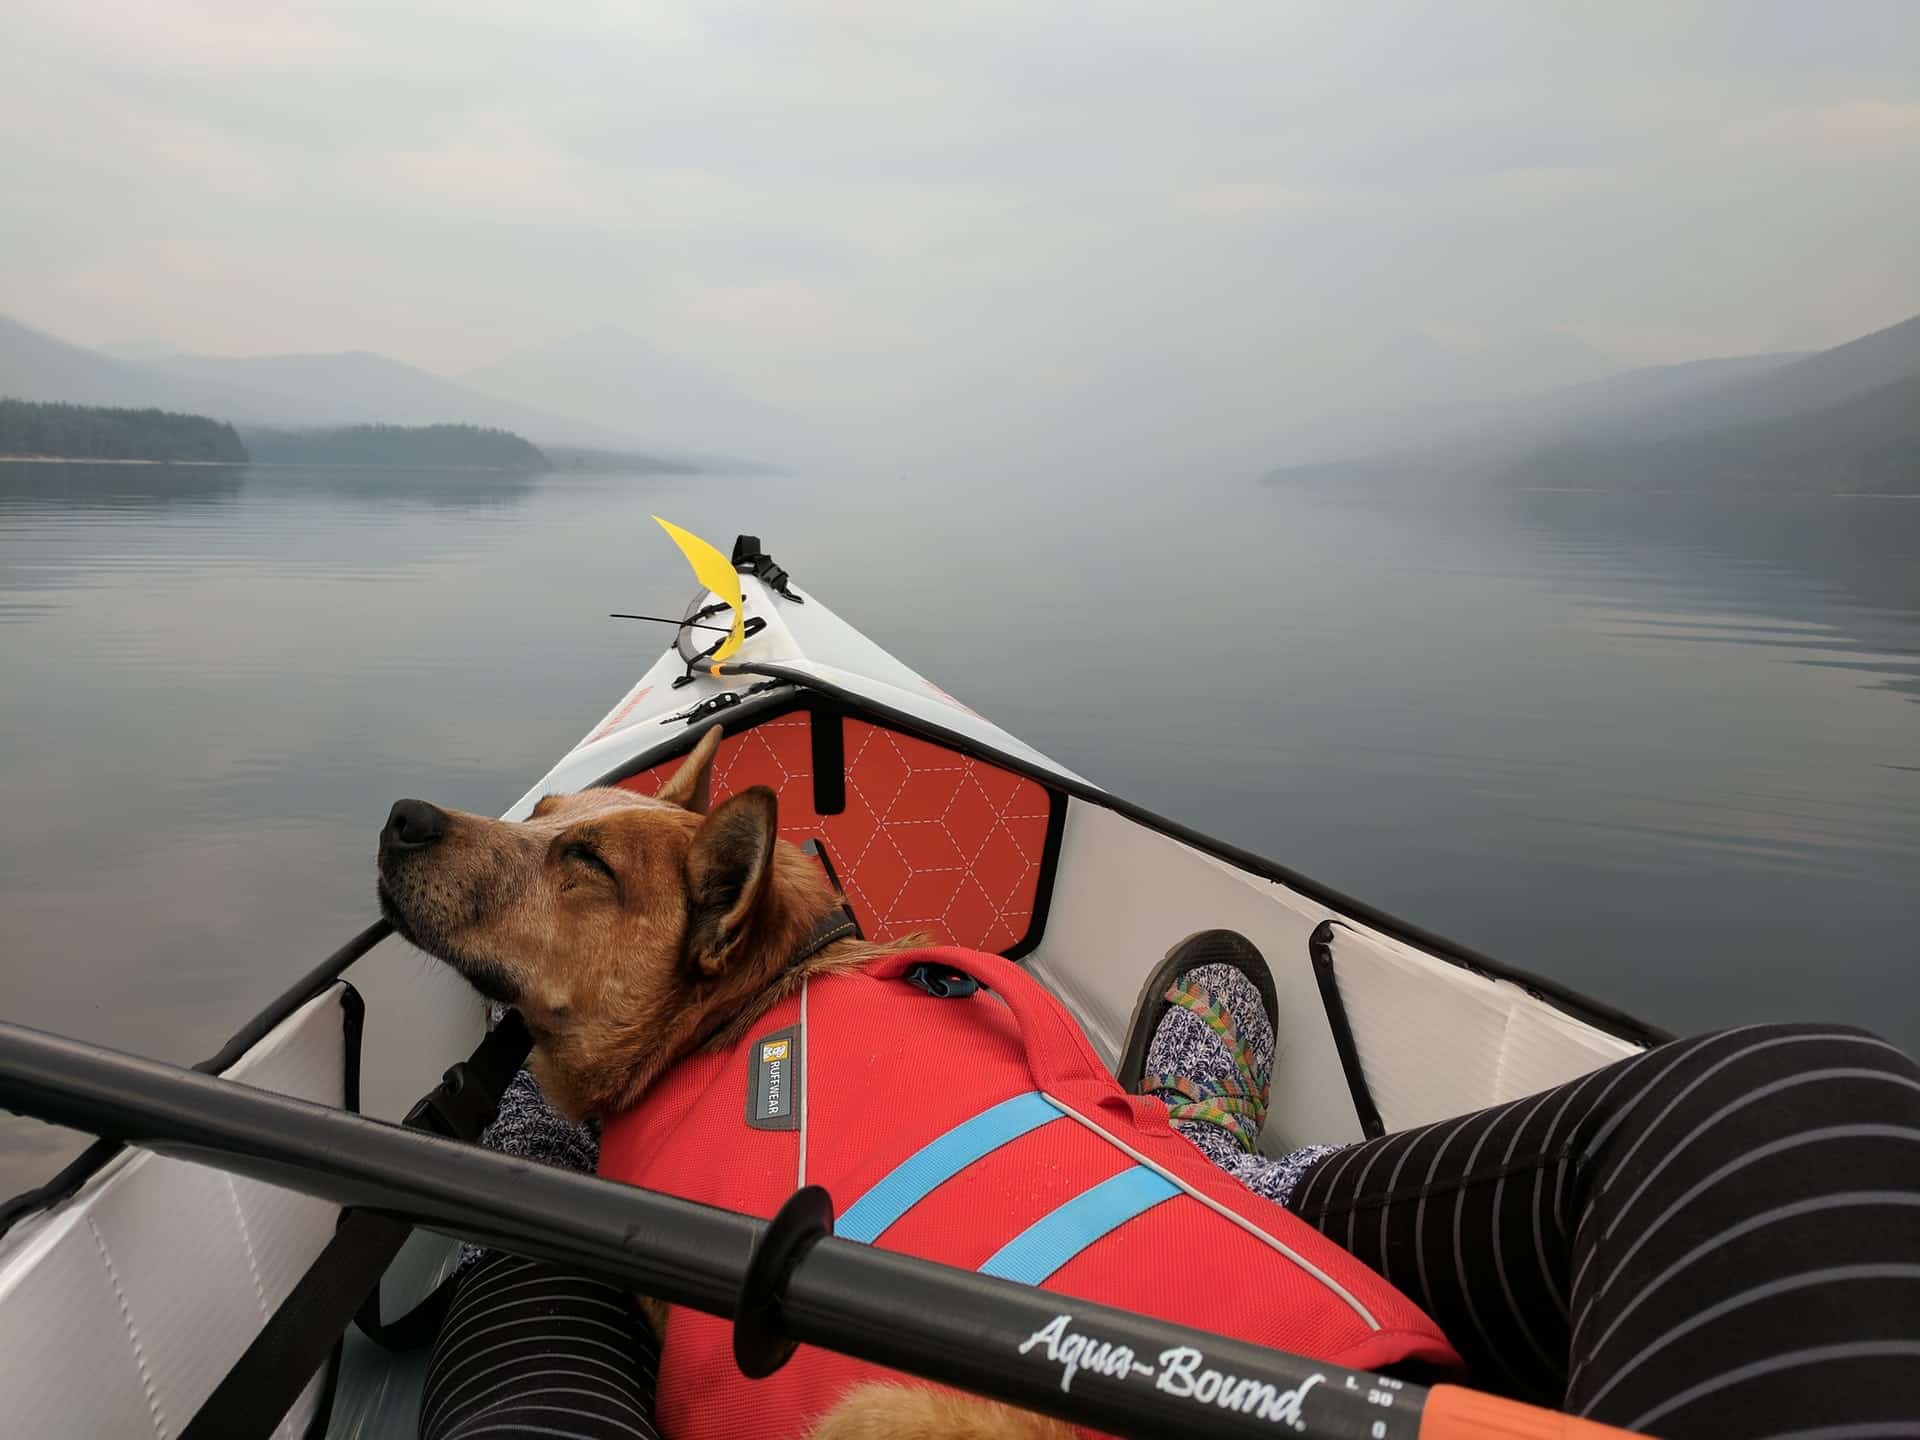 Boating with Your Dog